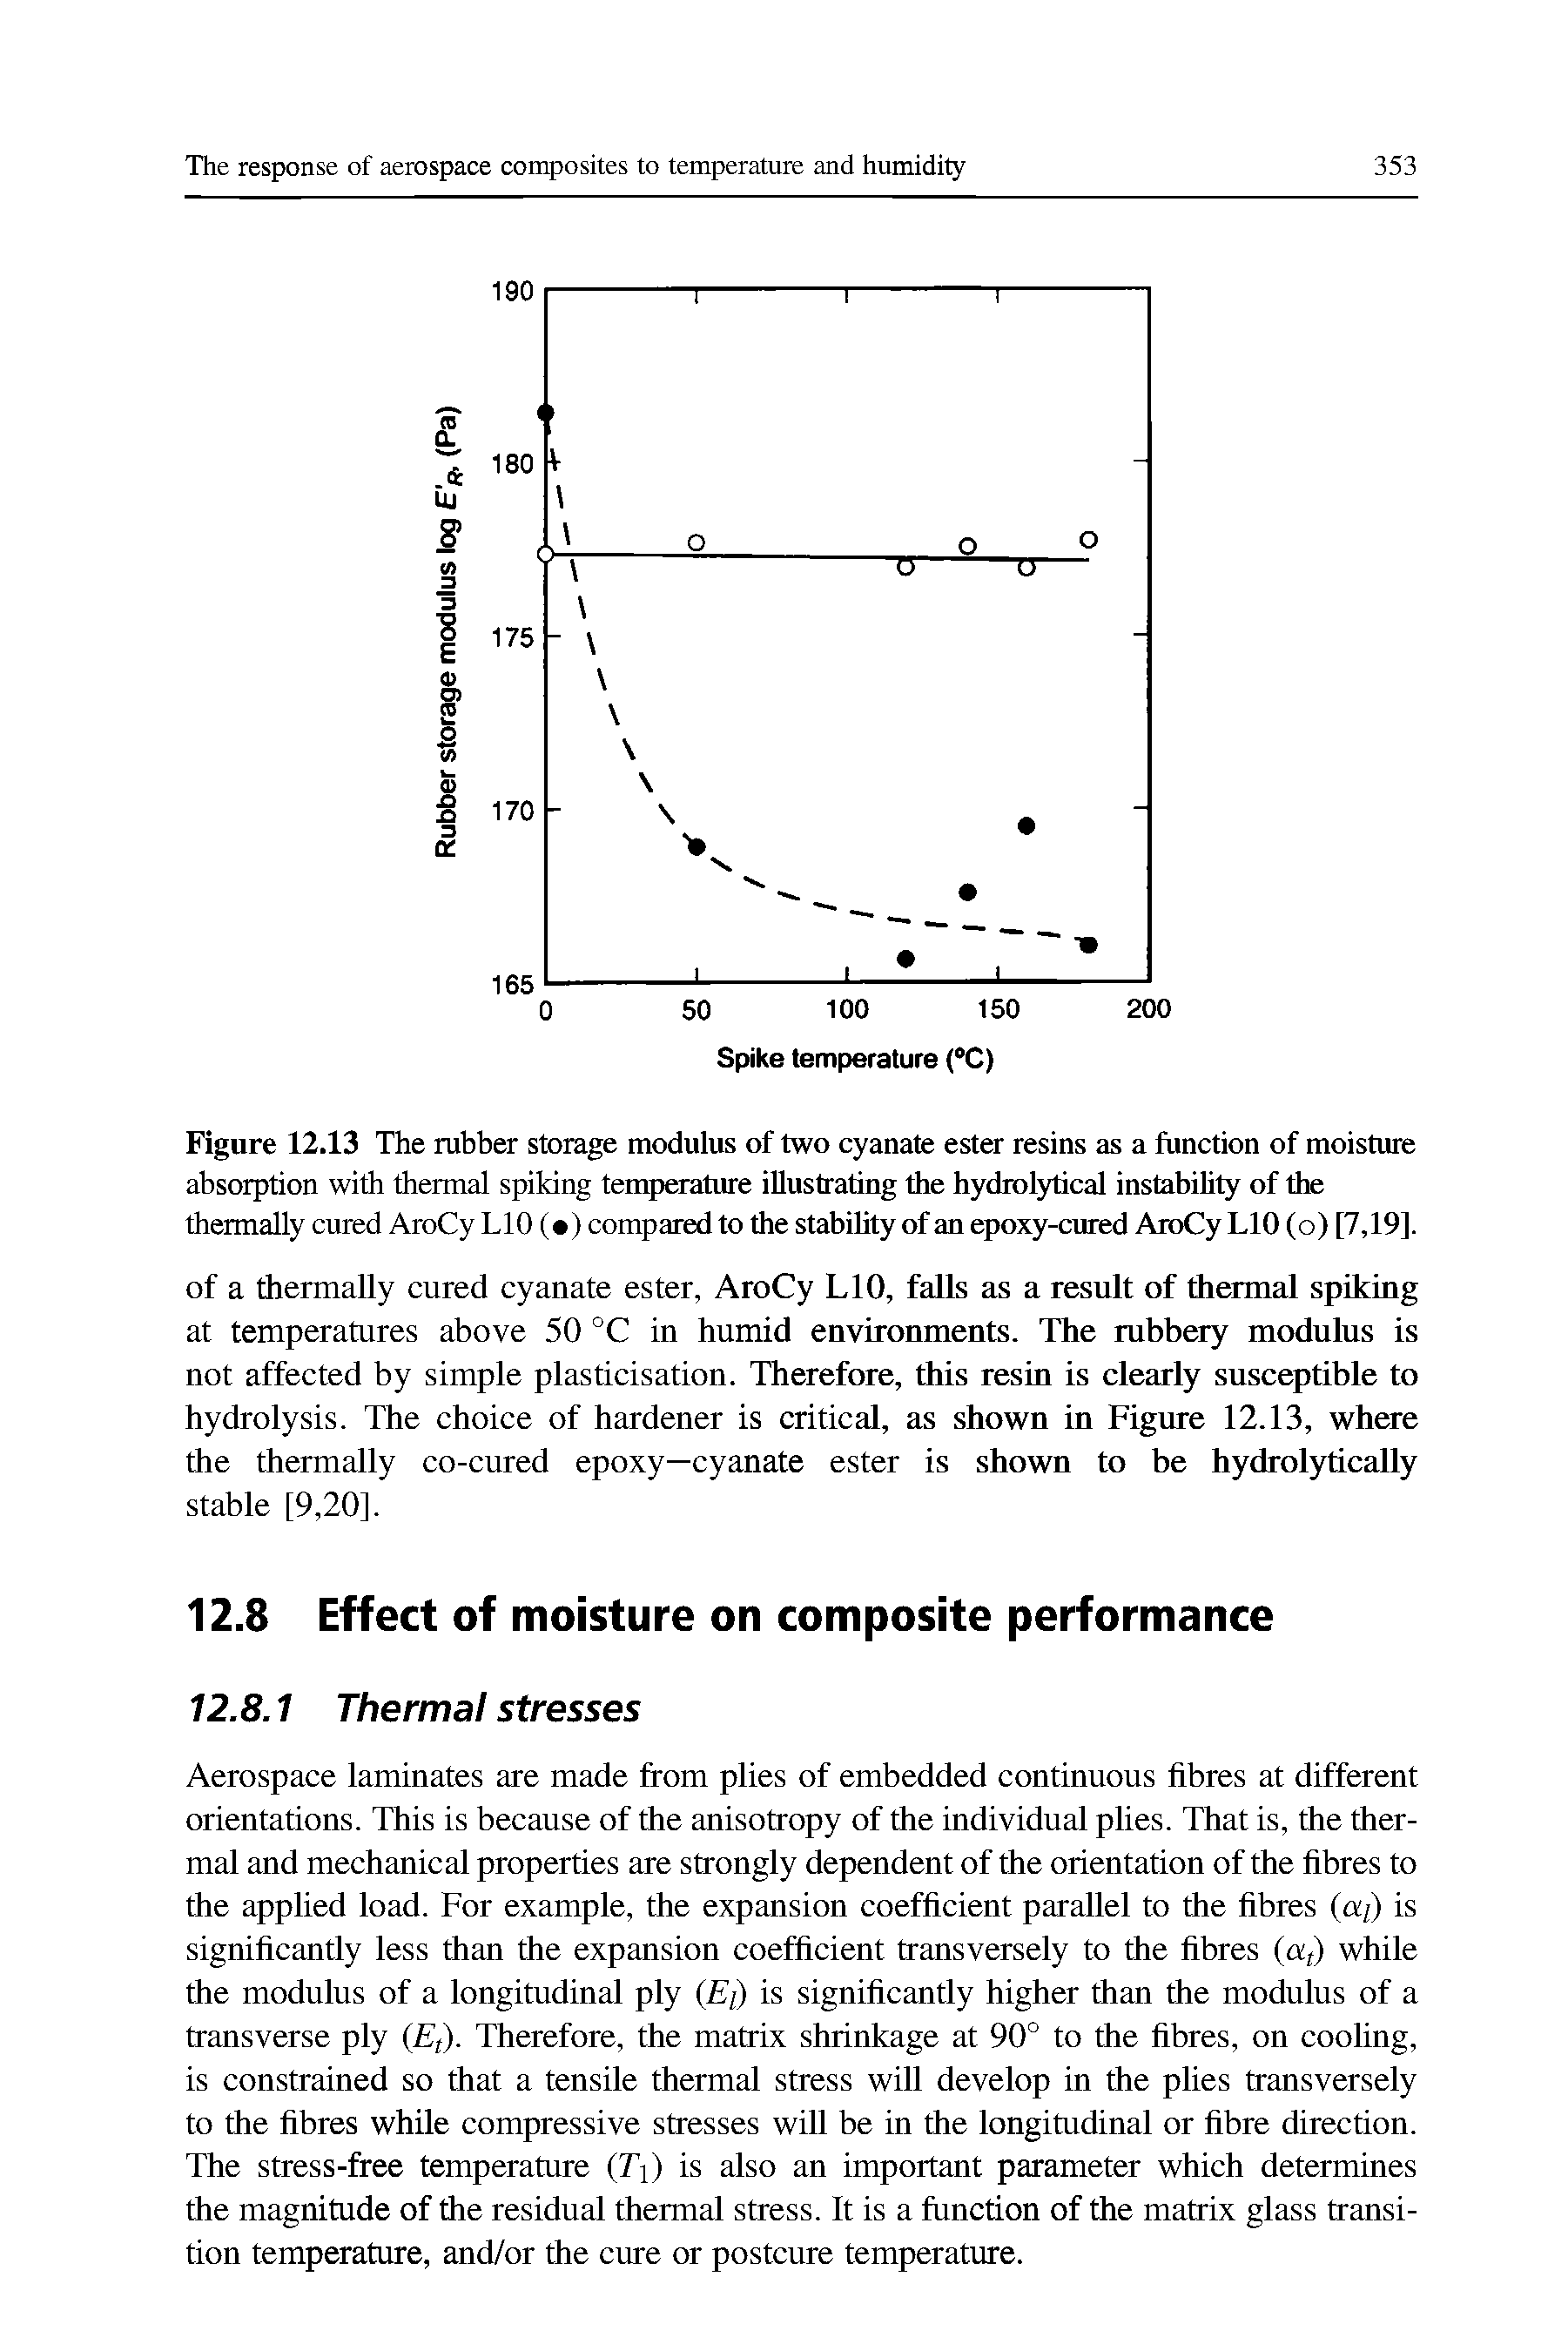 Figure 12.13 The rubber storage modulus of two cyanate ester resins as a function of moisture absorption with thermal spiking temperature illustrating the hydrolytical instability of the thermally cured AroCy LIO ( ) compared to the stability of an epoxy-cured AroCy LIO (o) [7,19].